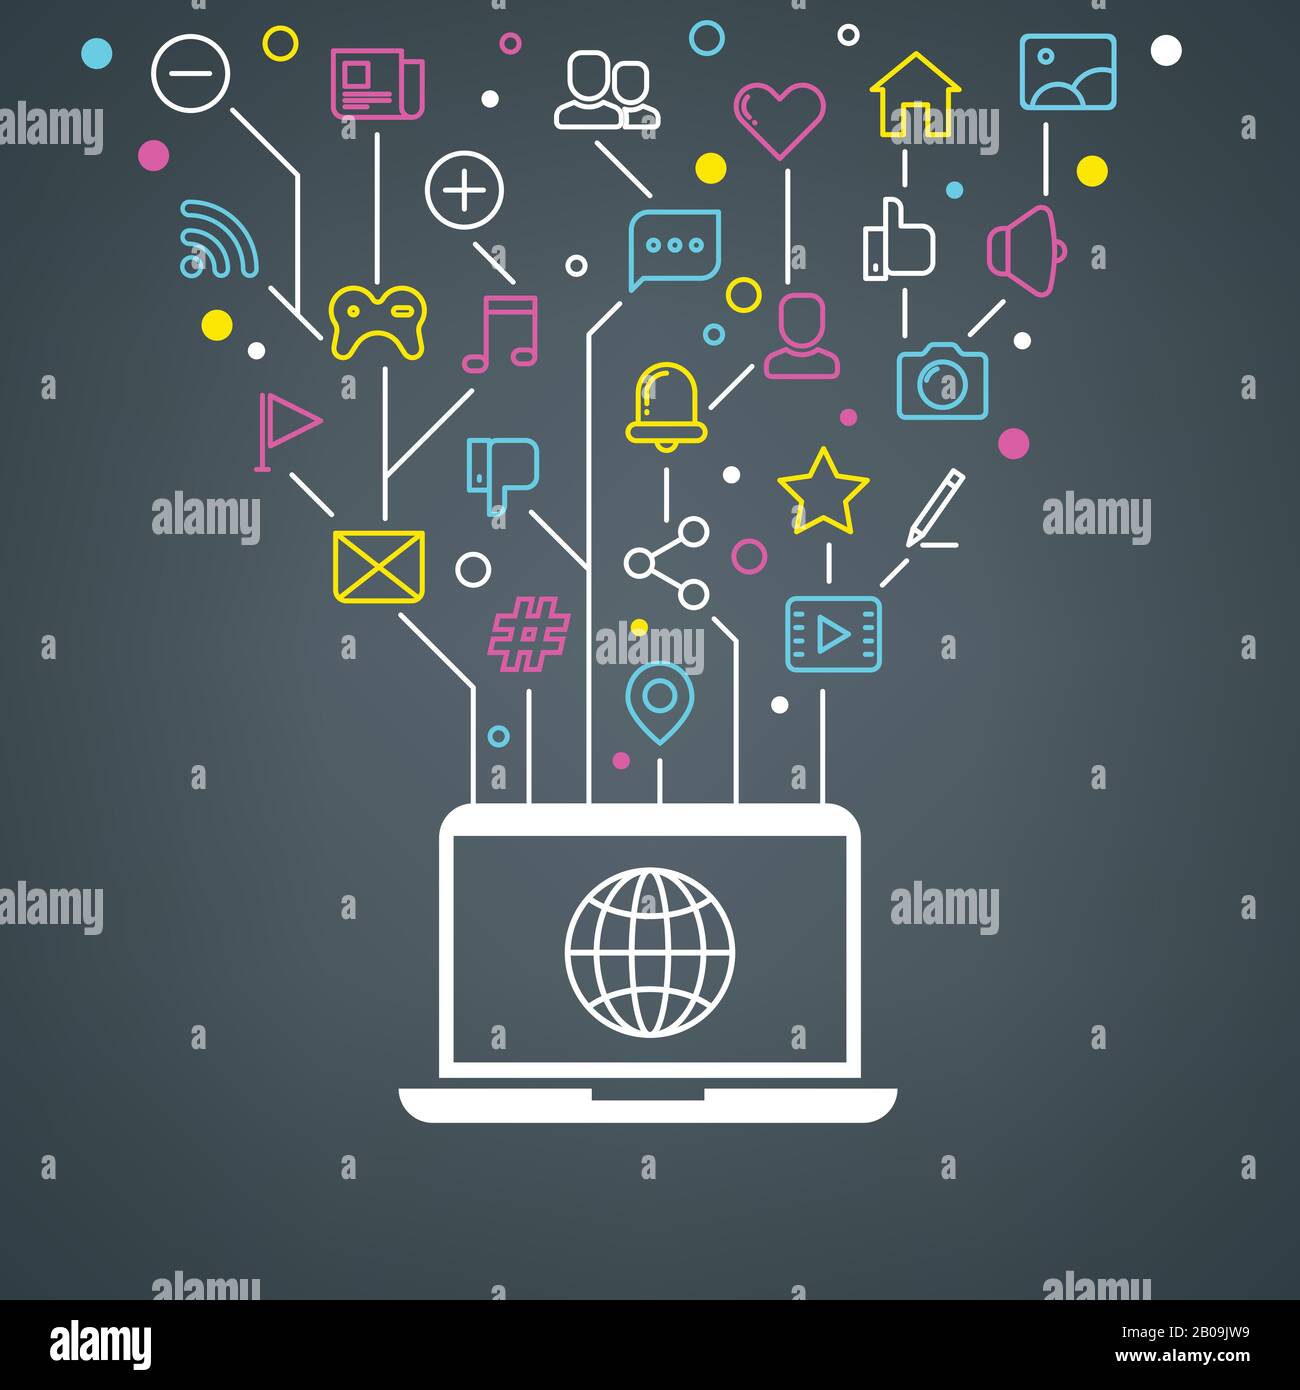 Social media network community, business connection technology vector concept. Laptop with access to social network, illustration of collection web icons for social media Stock Vector